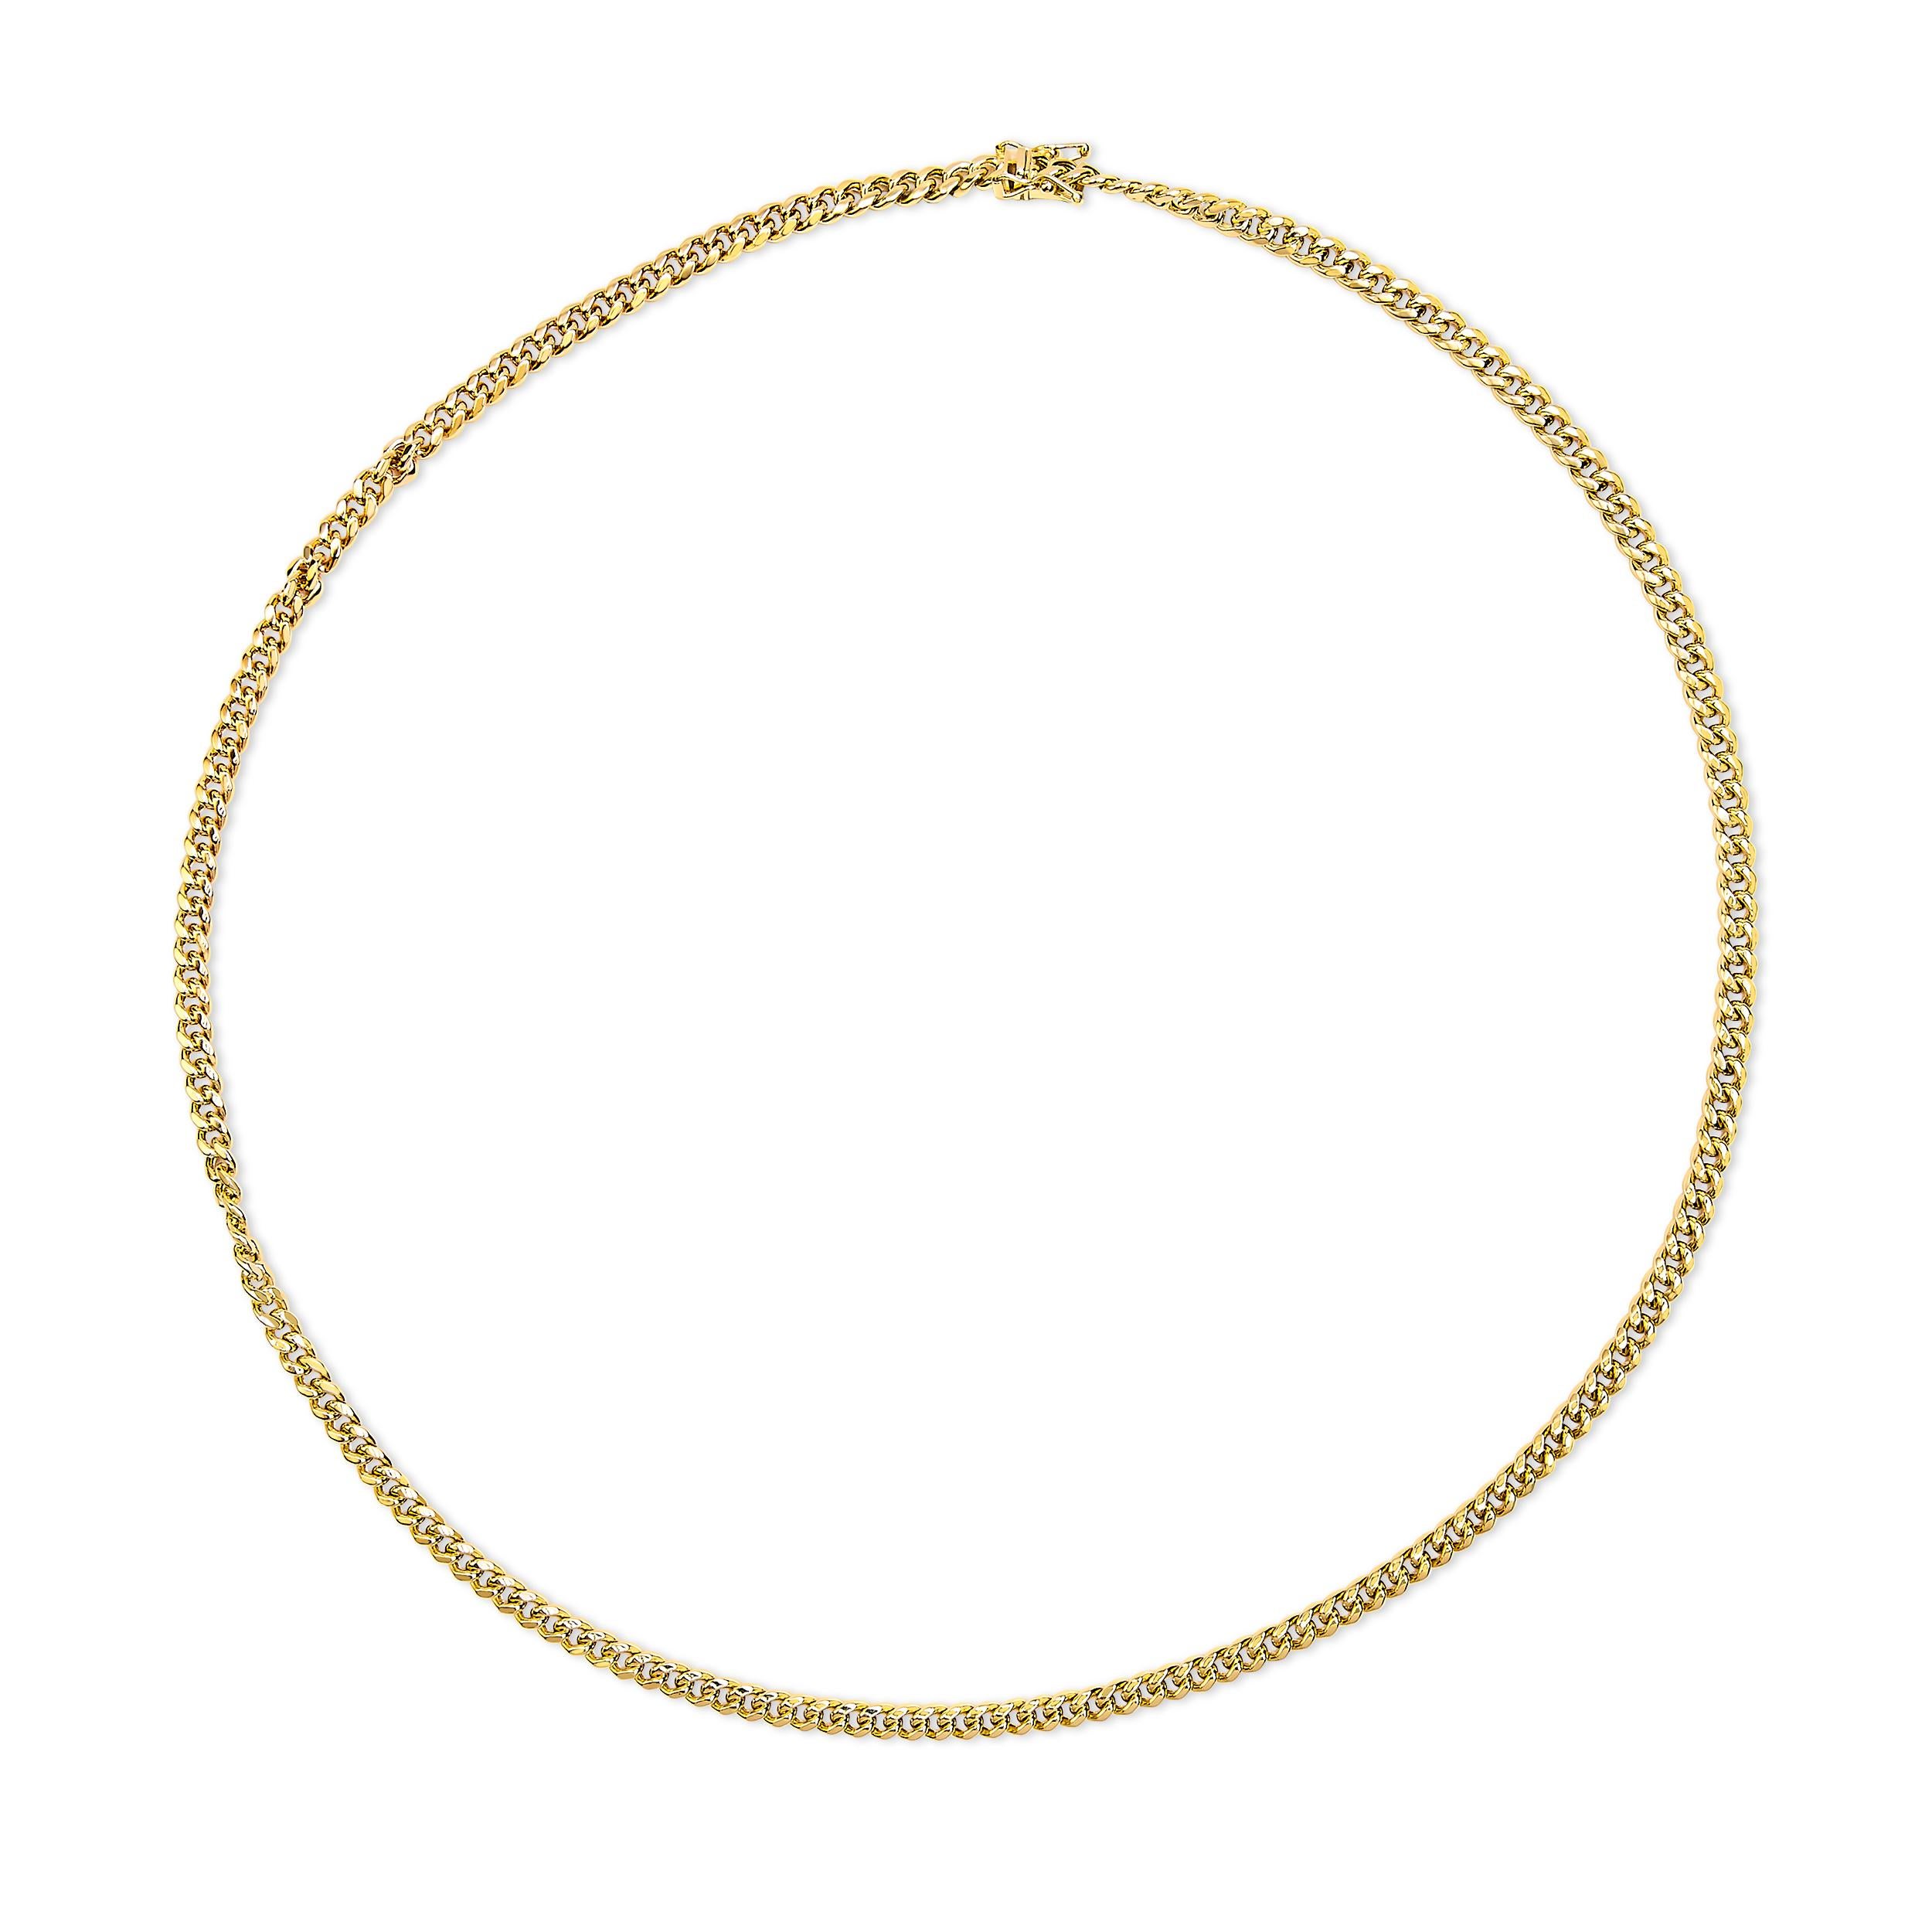 Modern Semi-Solid 14K Yellow Gold 4.5mm Miami Cuban Chain Necklace - 22 Inches For Sale